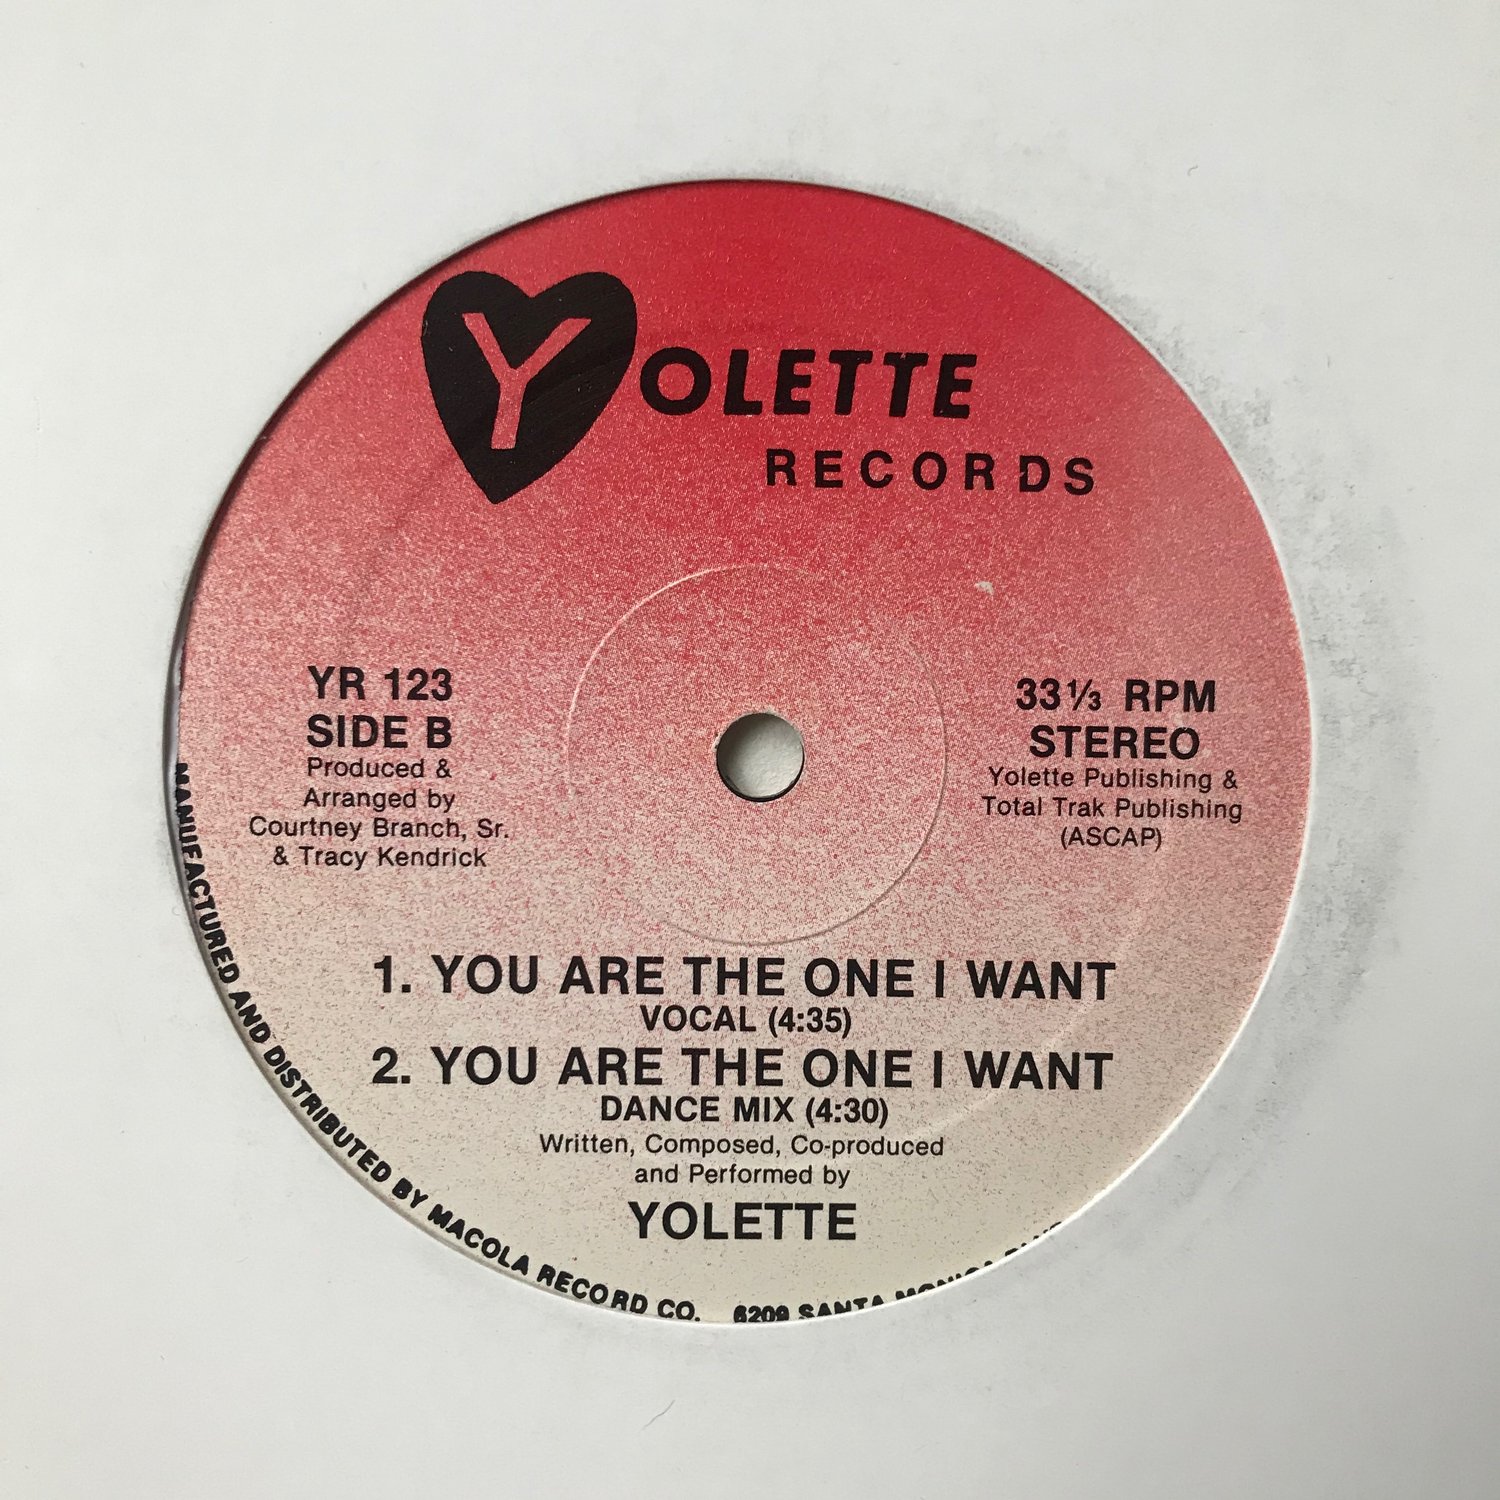 Image of Yolette - Don't Go Away